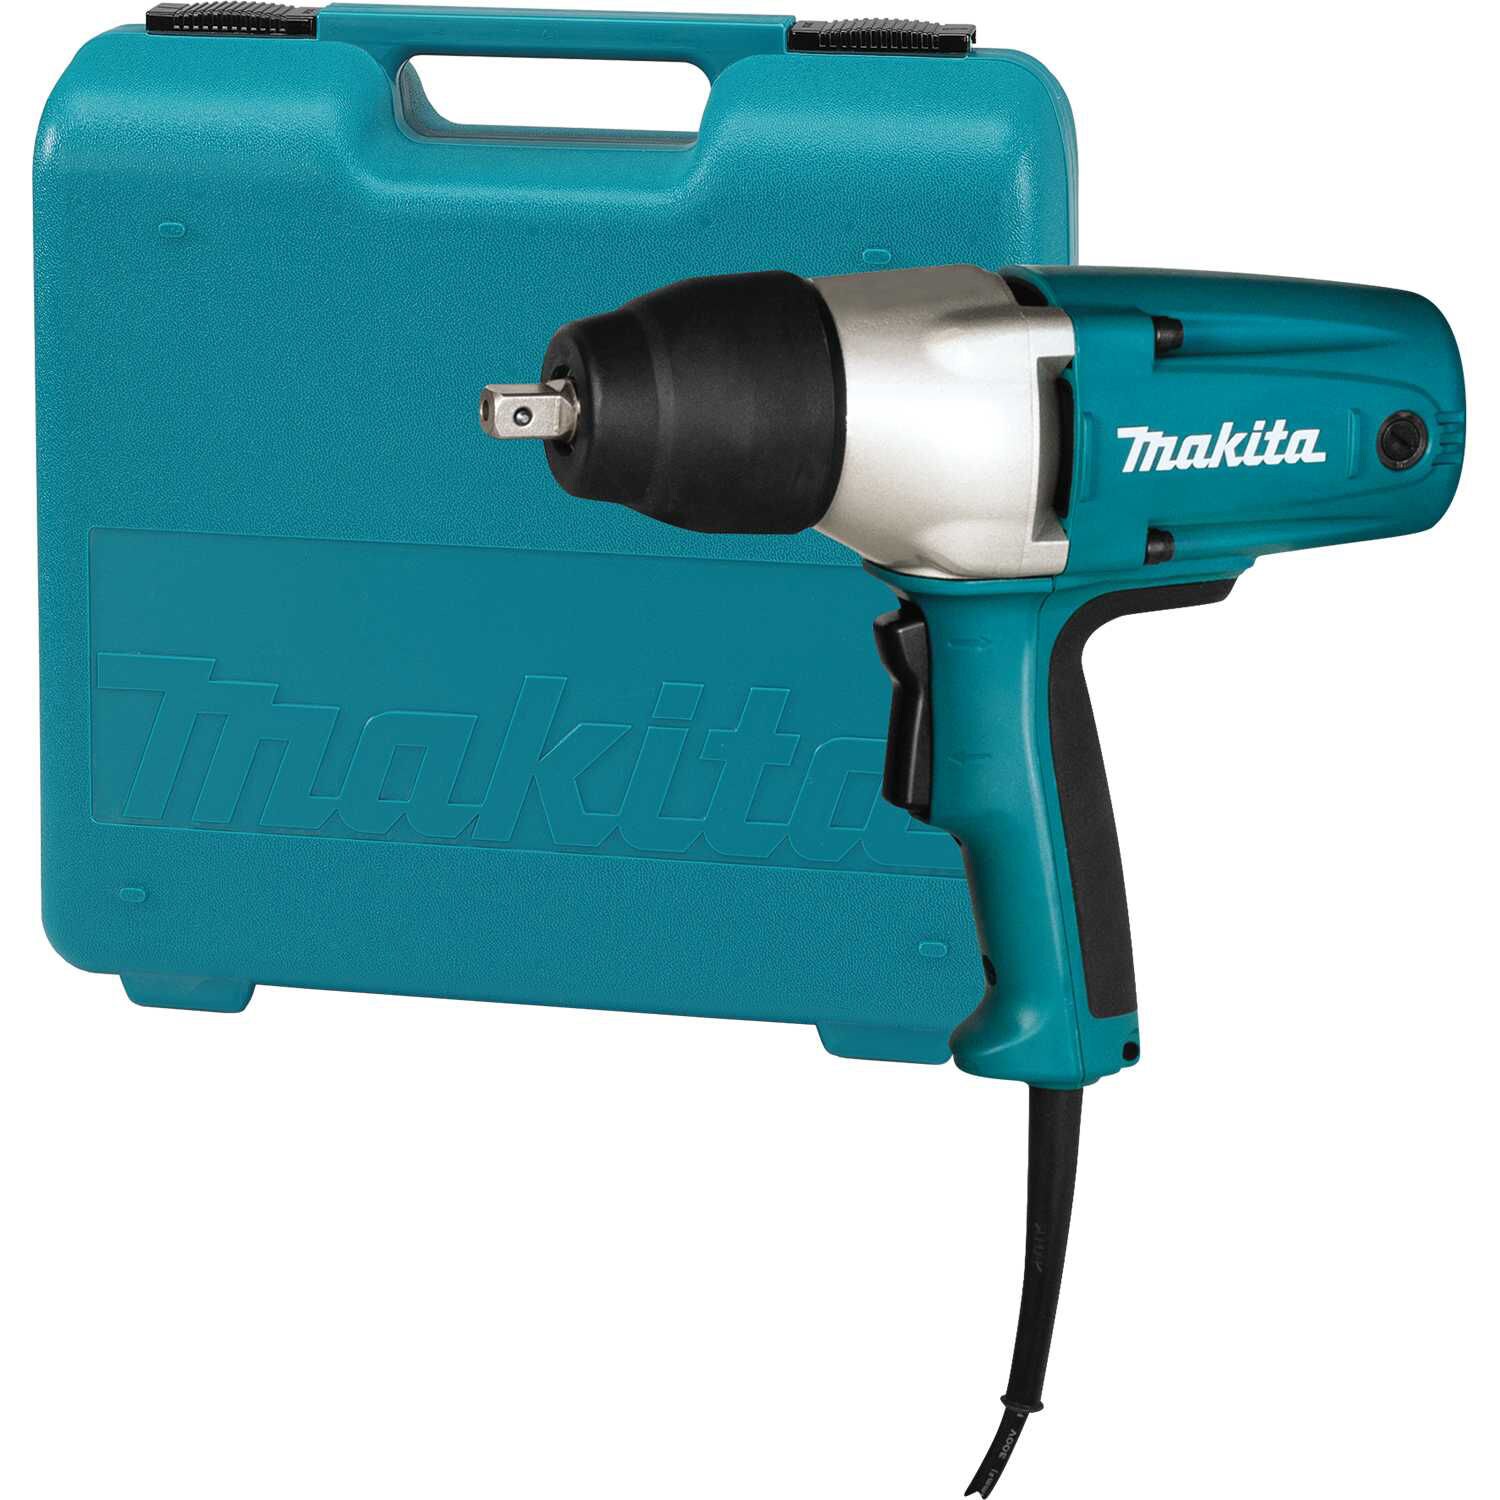 Makita Impact Wrench with Detent Pin Anvil, 0.5inch